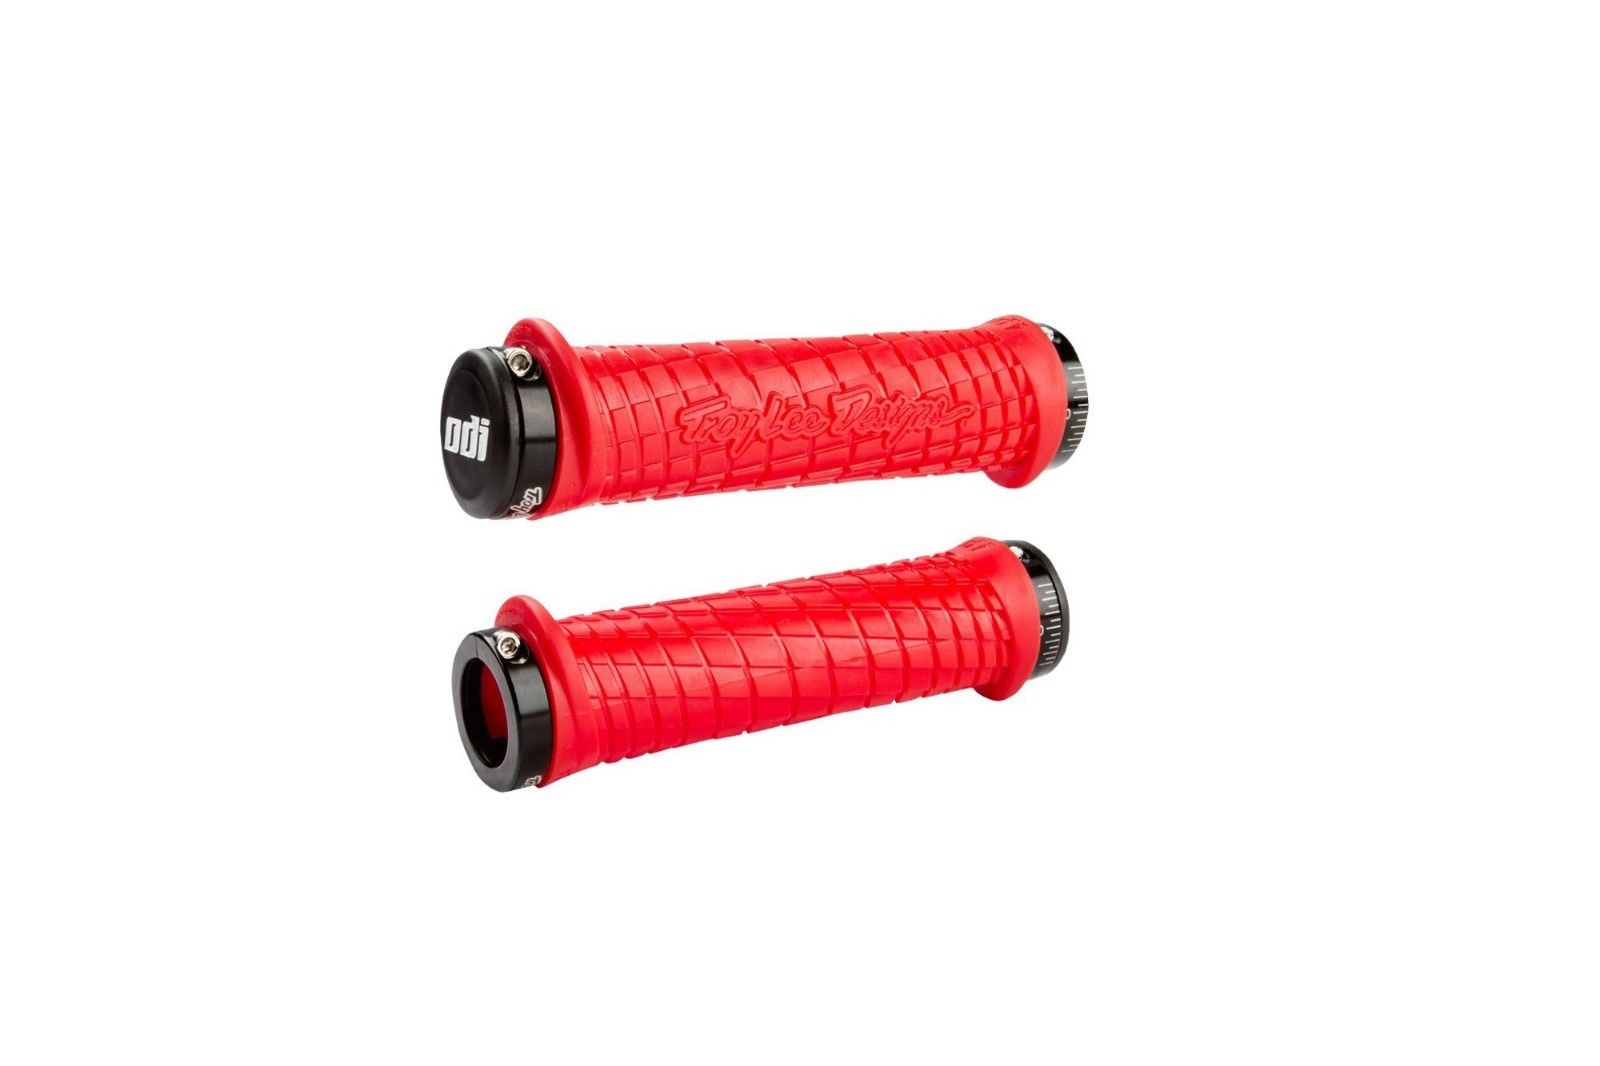 ODI Troy Lee Designs Lock-On BMX Grips - Red w/ Black clamps - USA Made